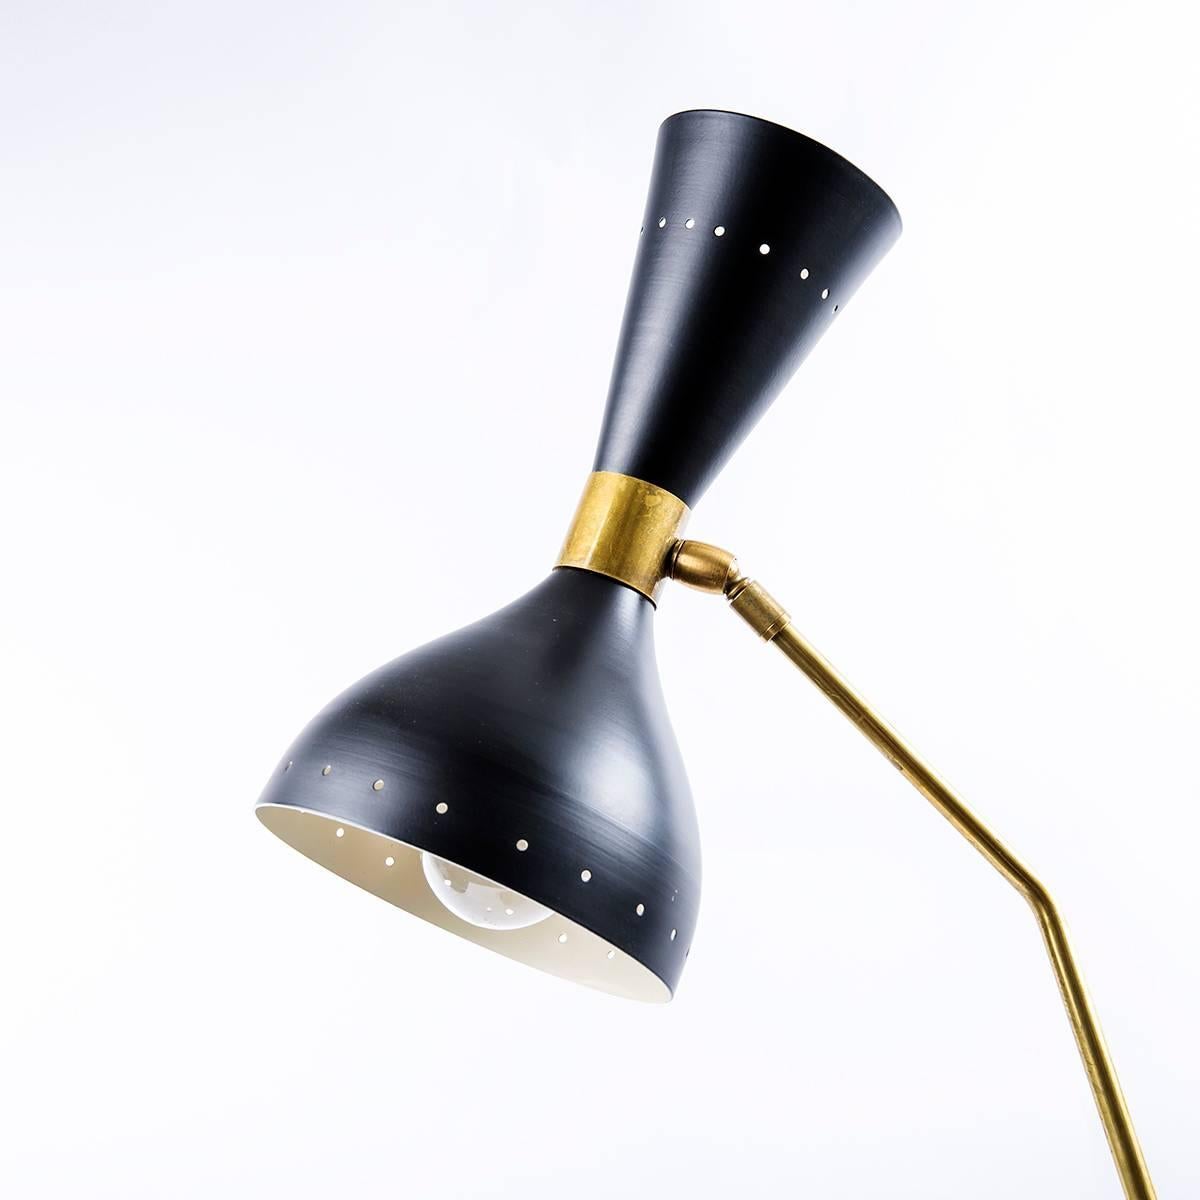 Modern Lamberti & Co. Libra-Lux Table Lamps Attributed to Roberto Menghi 1950